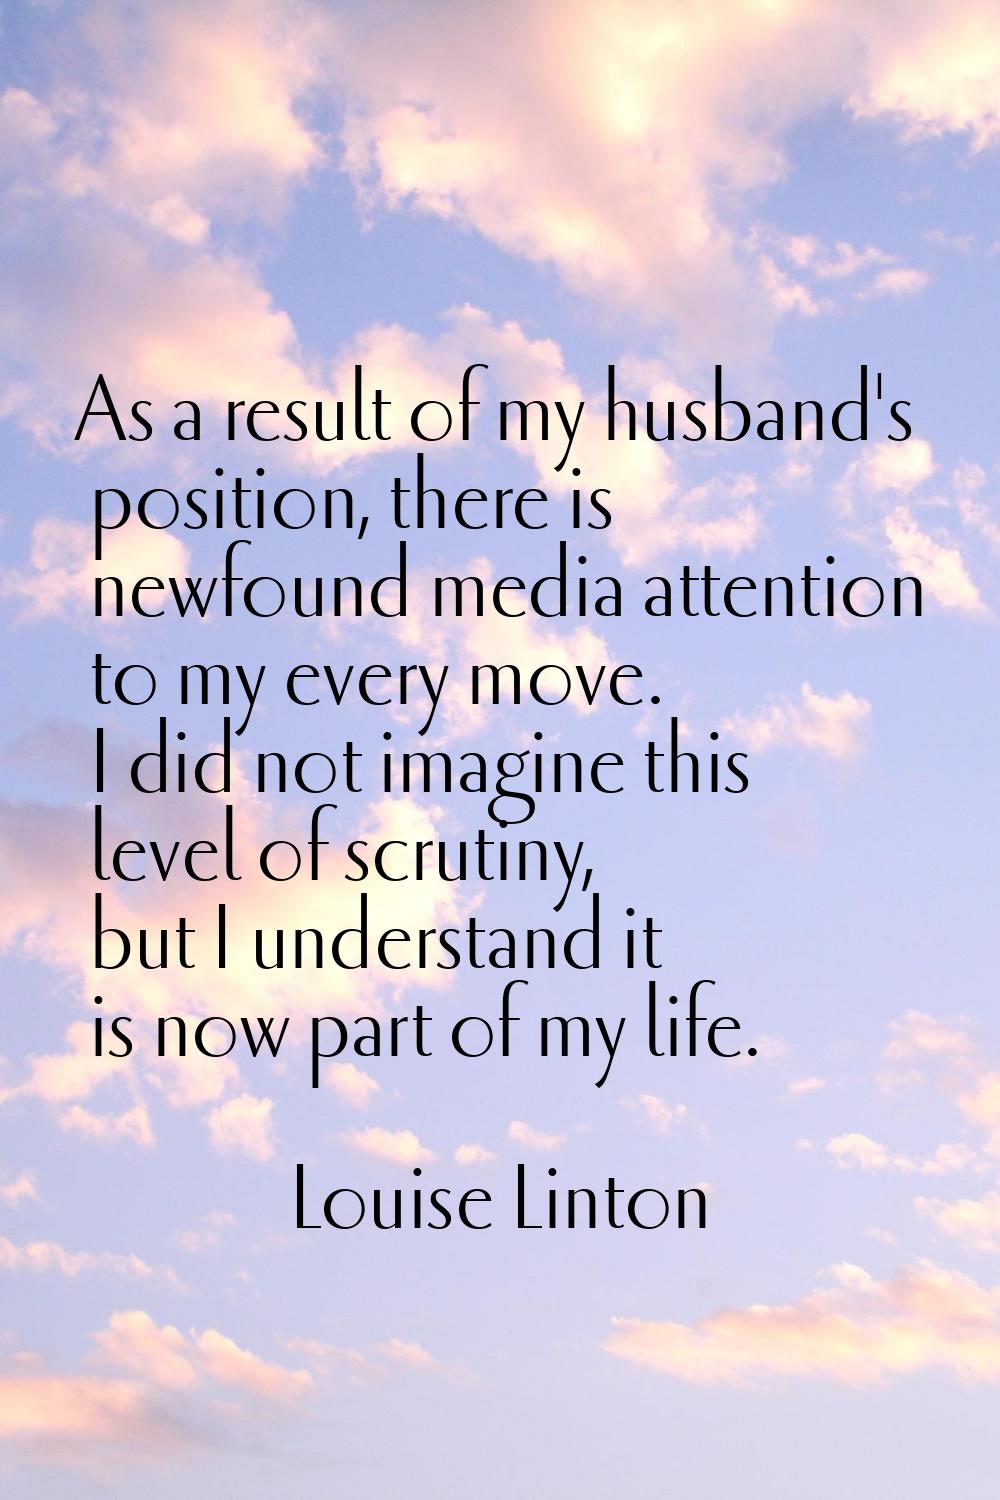 As a result of my husband's position, there is newfound media attention to my every move. I did not